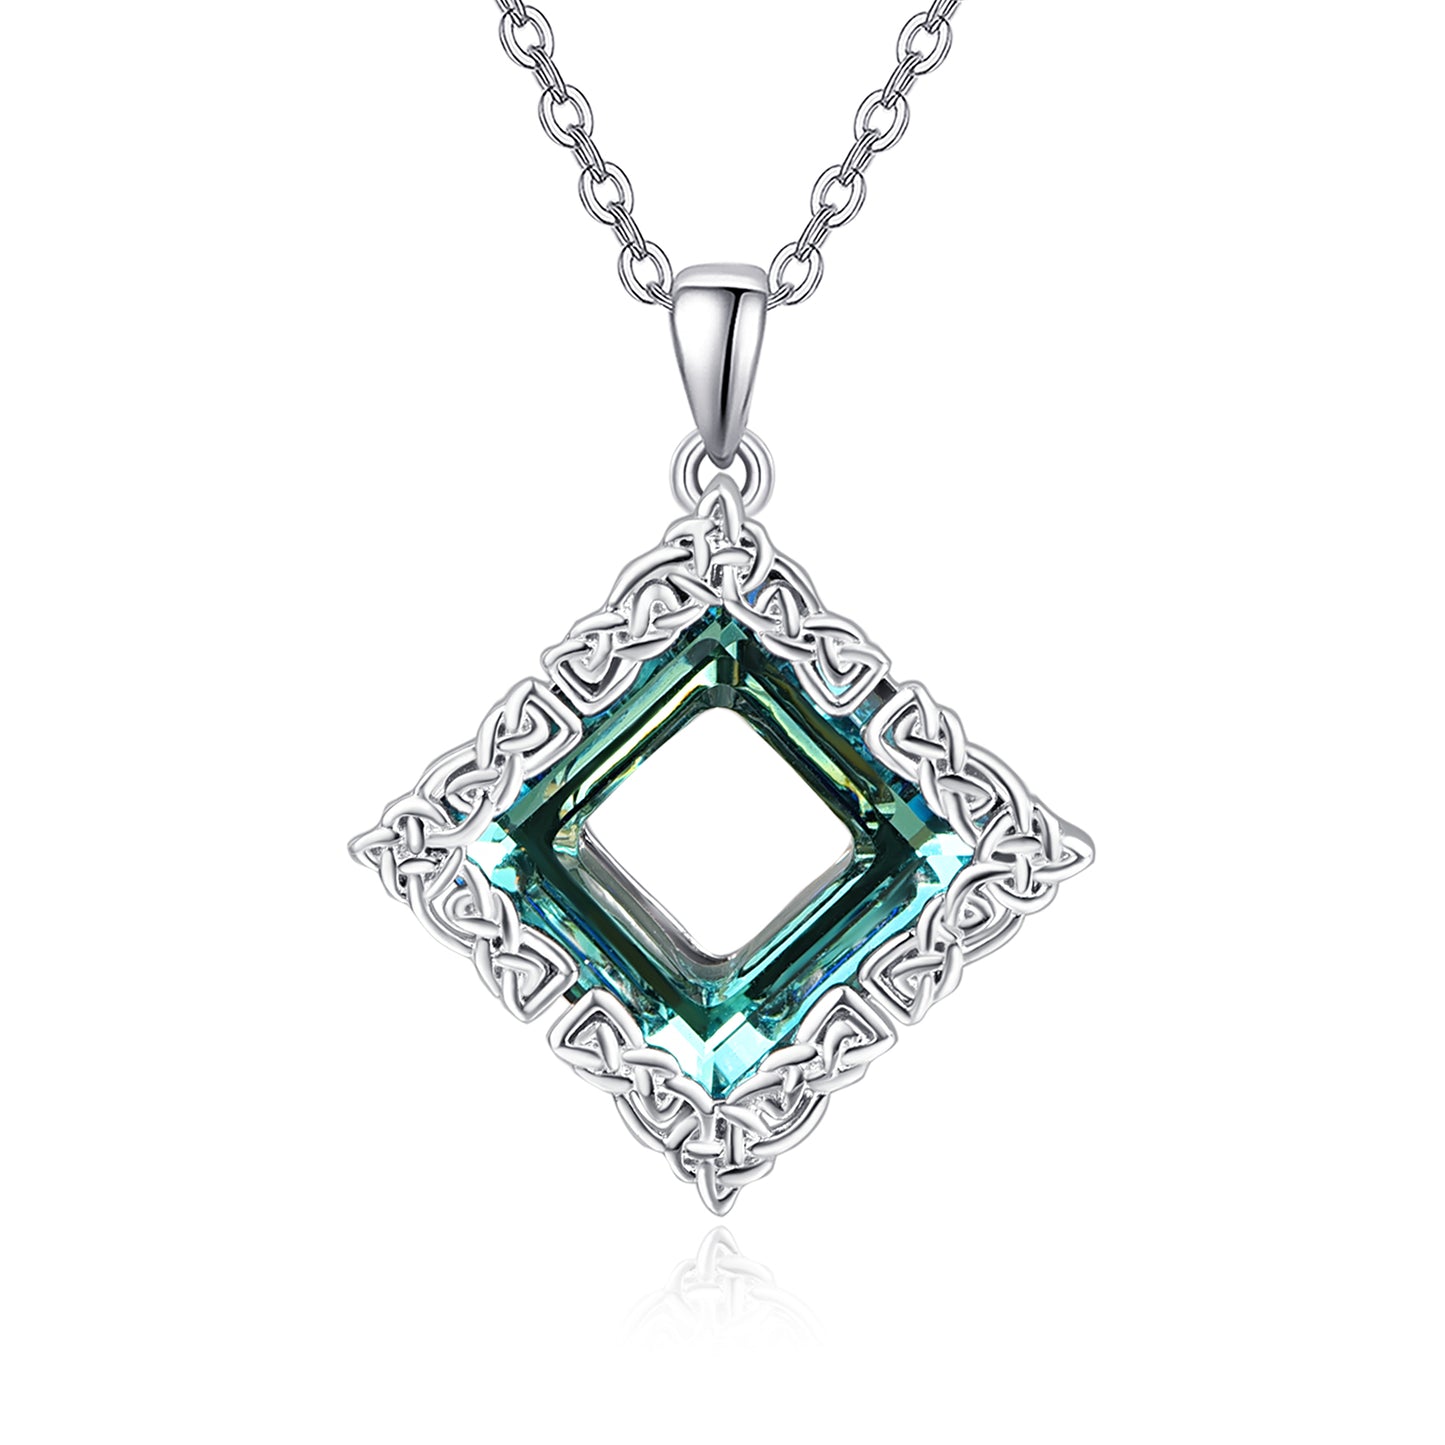 A Maramalive™ silver pendant with a green Celtic Crystal Necklace 925 Sterling Silver Green Crystal Pendant Necklace Celtic Knot Pendant Necklace Jewellery Gift for Women stone.